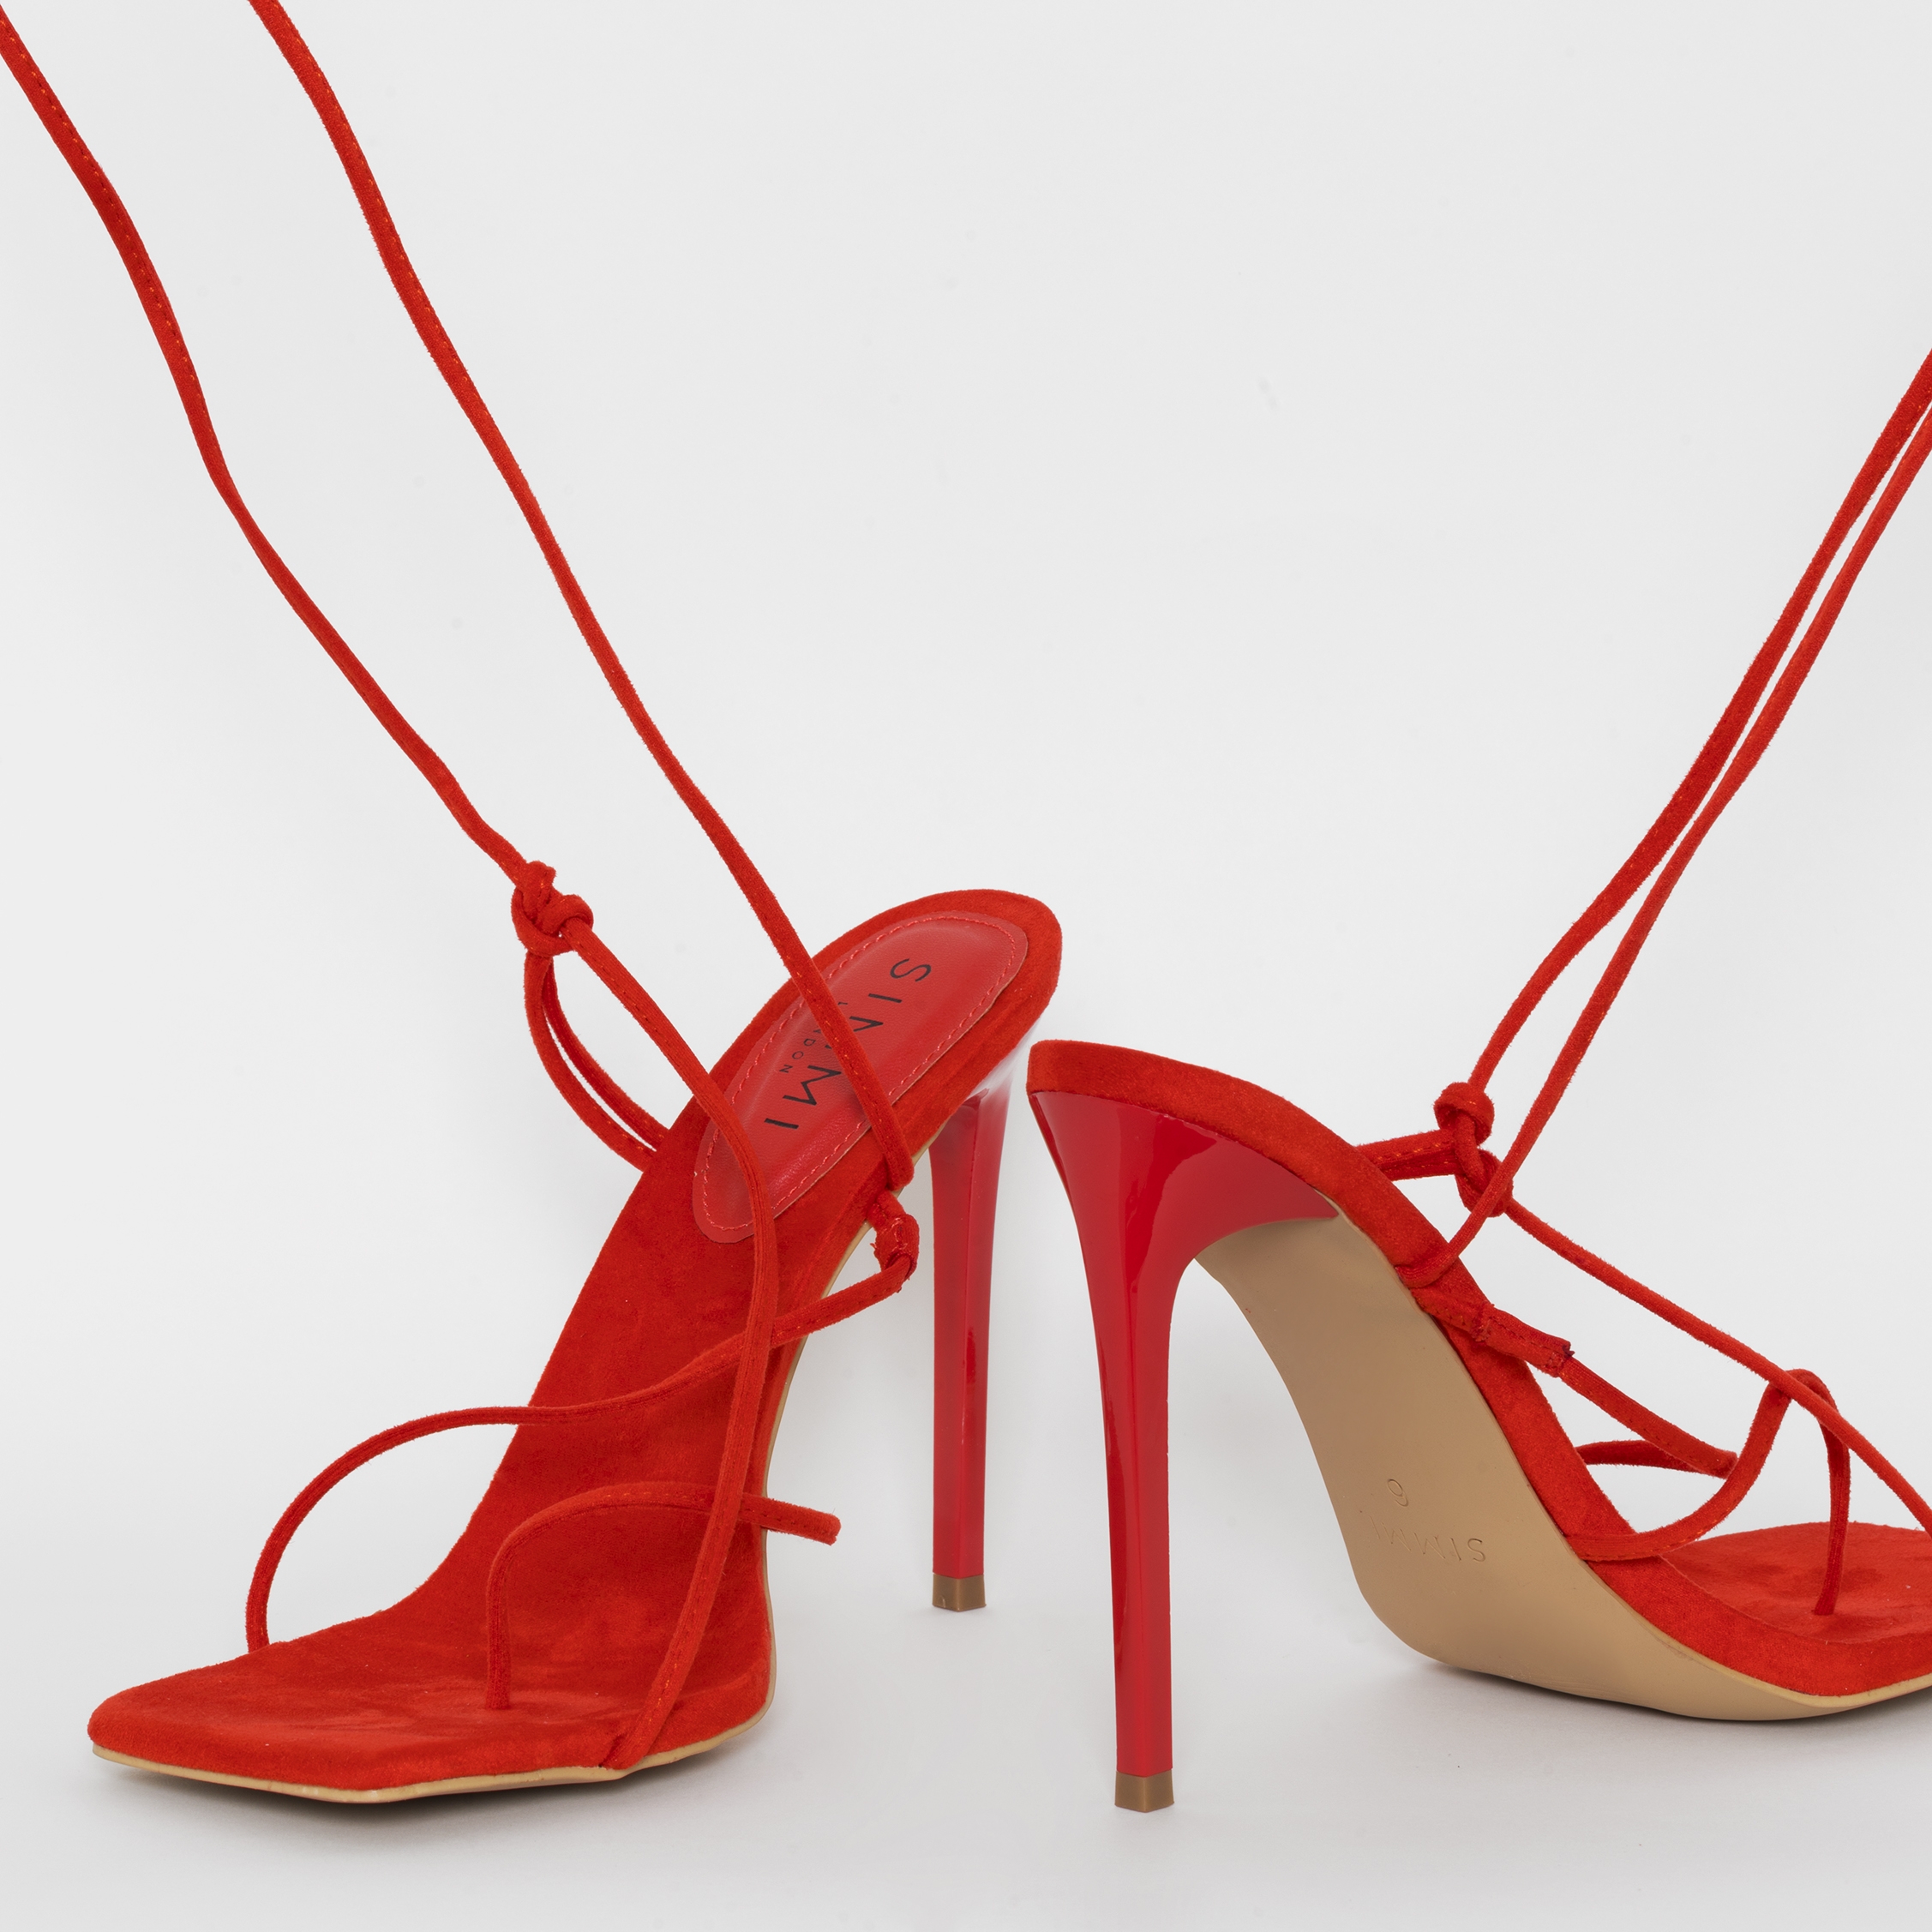 Serenity Red Suede Lace Up Stiletto Heels